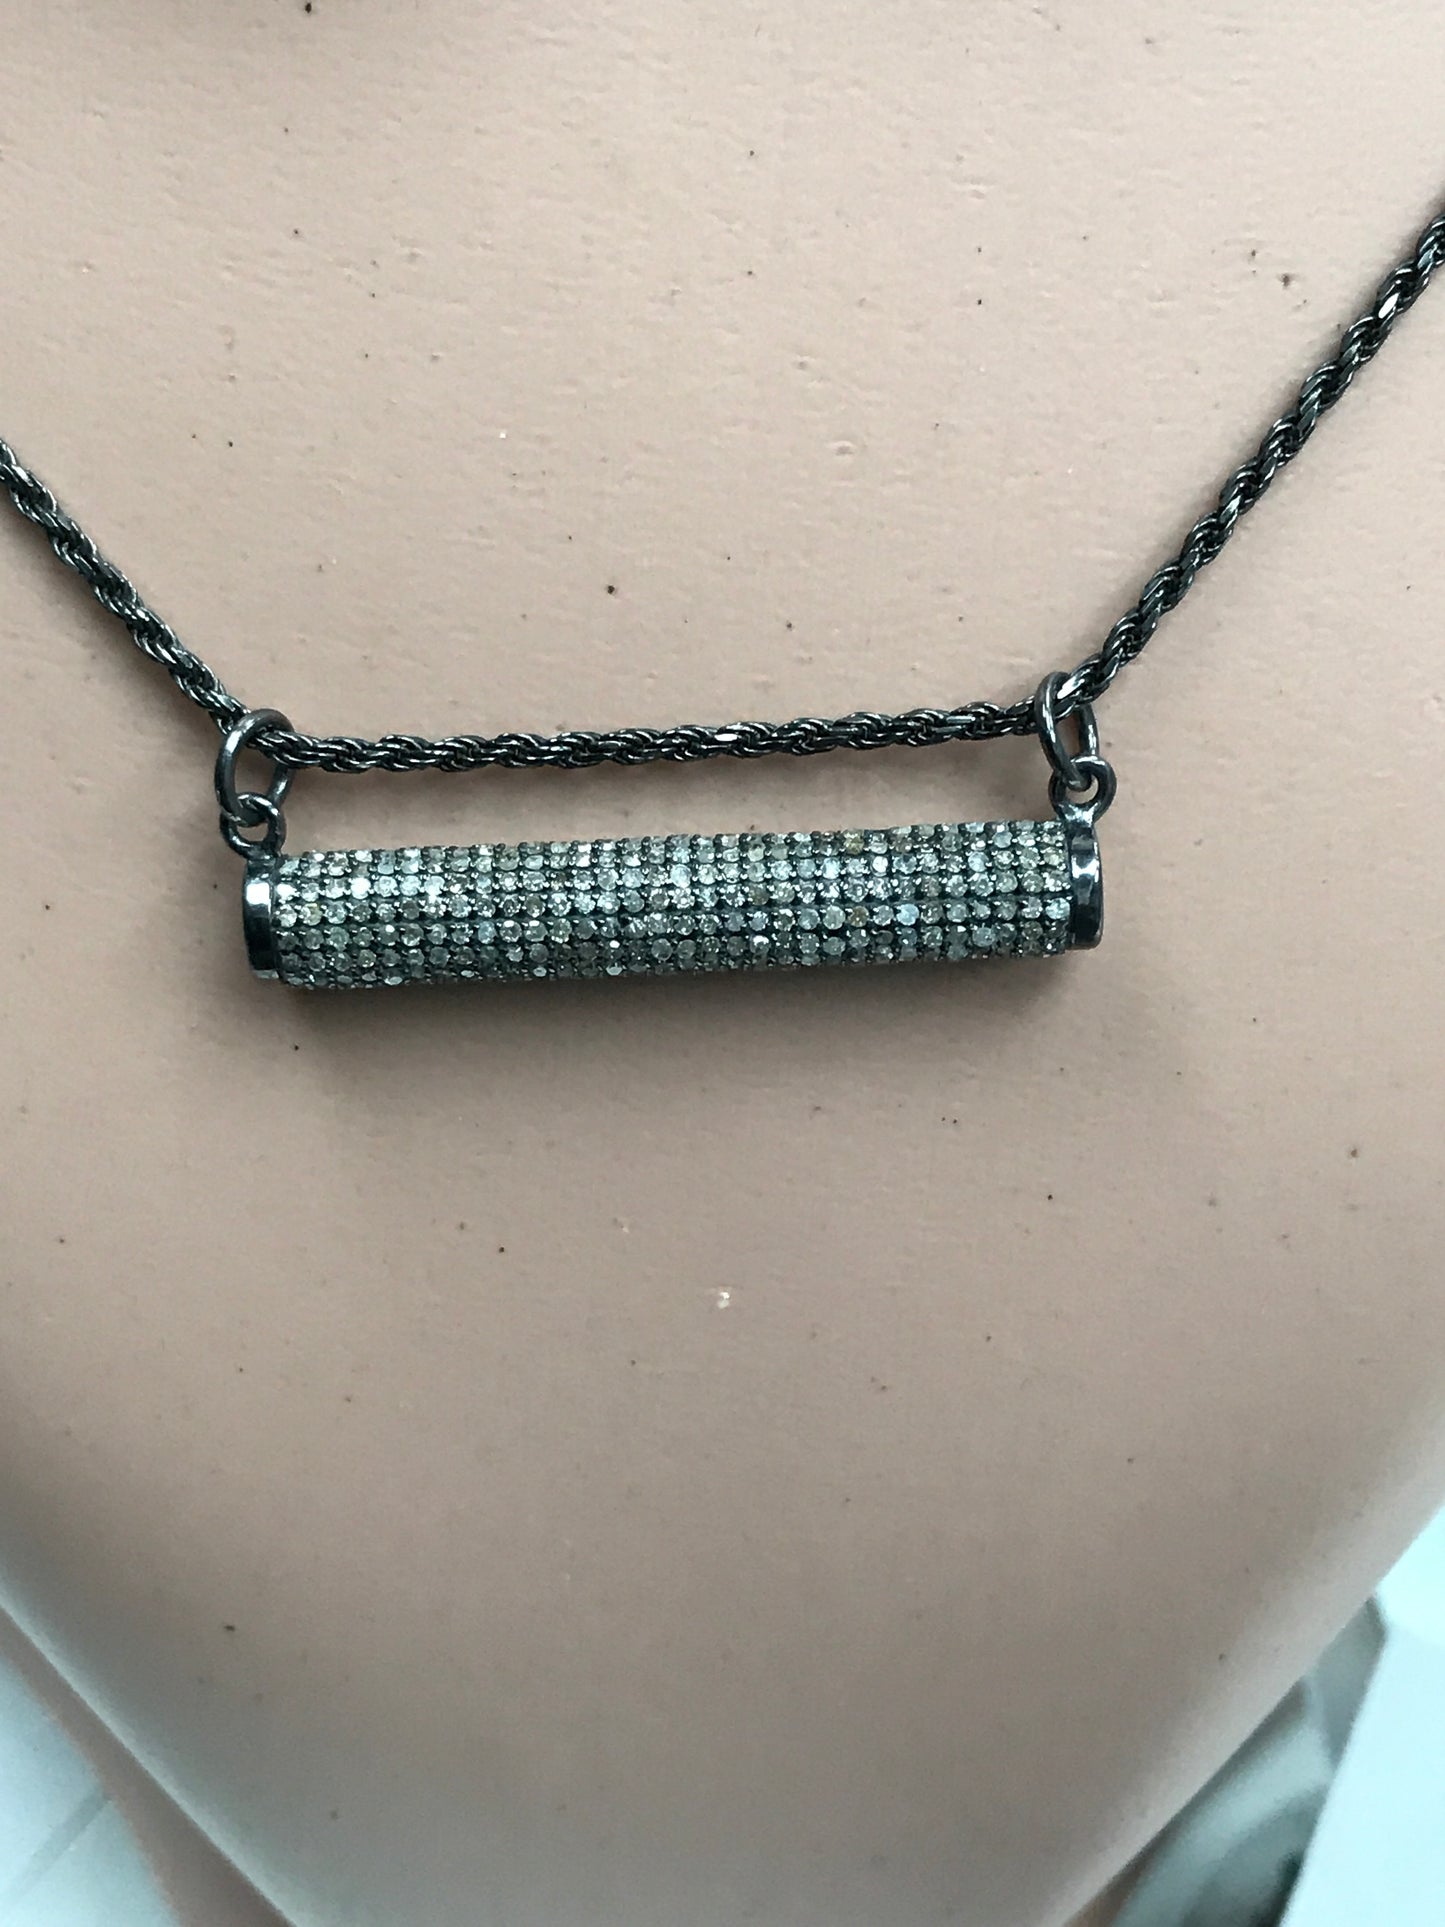 Diamond Cylindrical Pendant, Pave Diamond Pendant, Pave Cylindrical Necklace, Appx 6 x 36mm. Sterling Silver